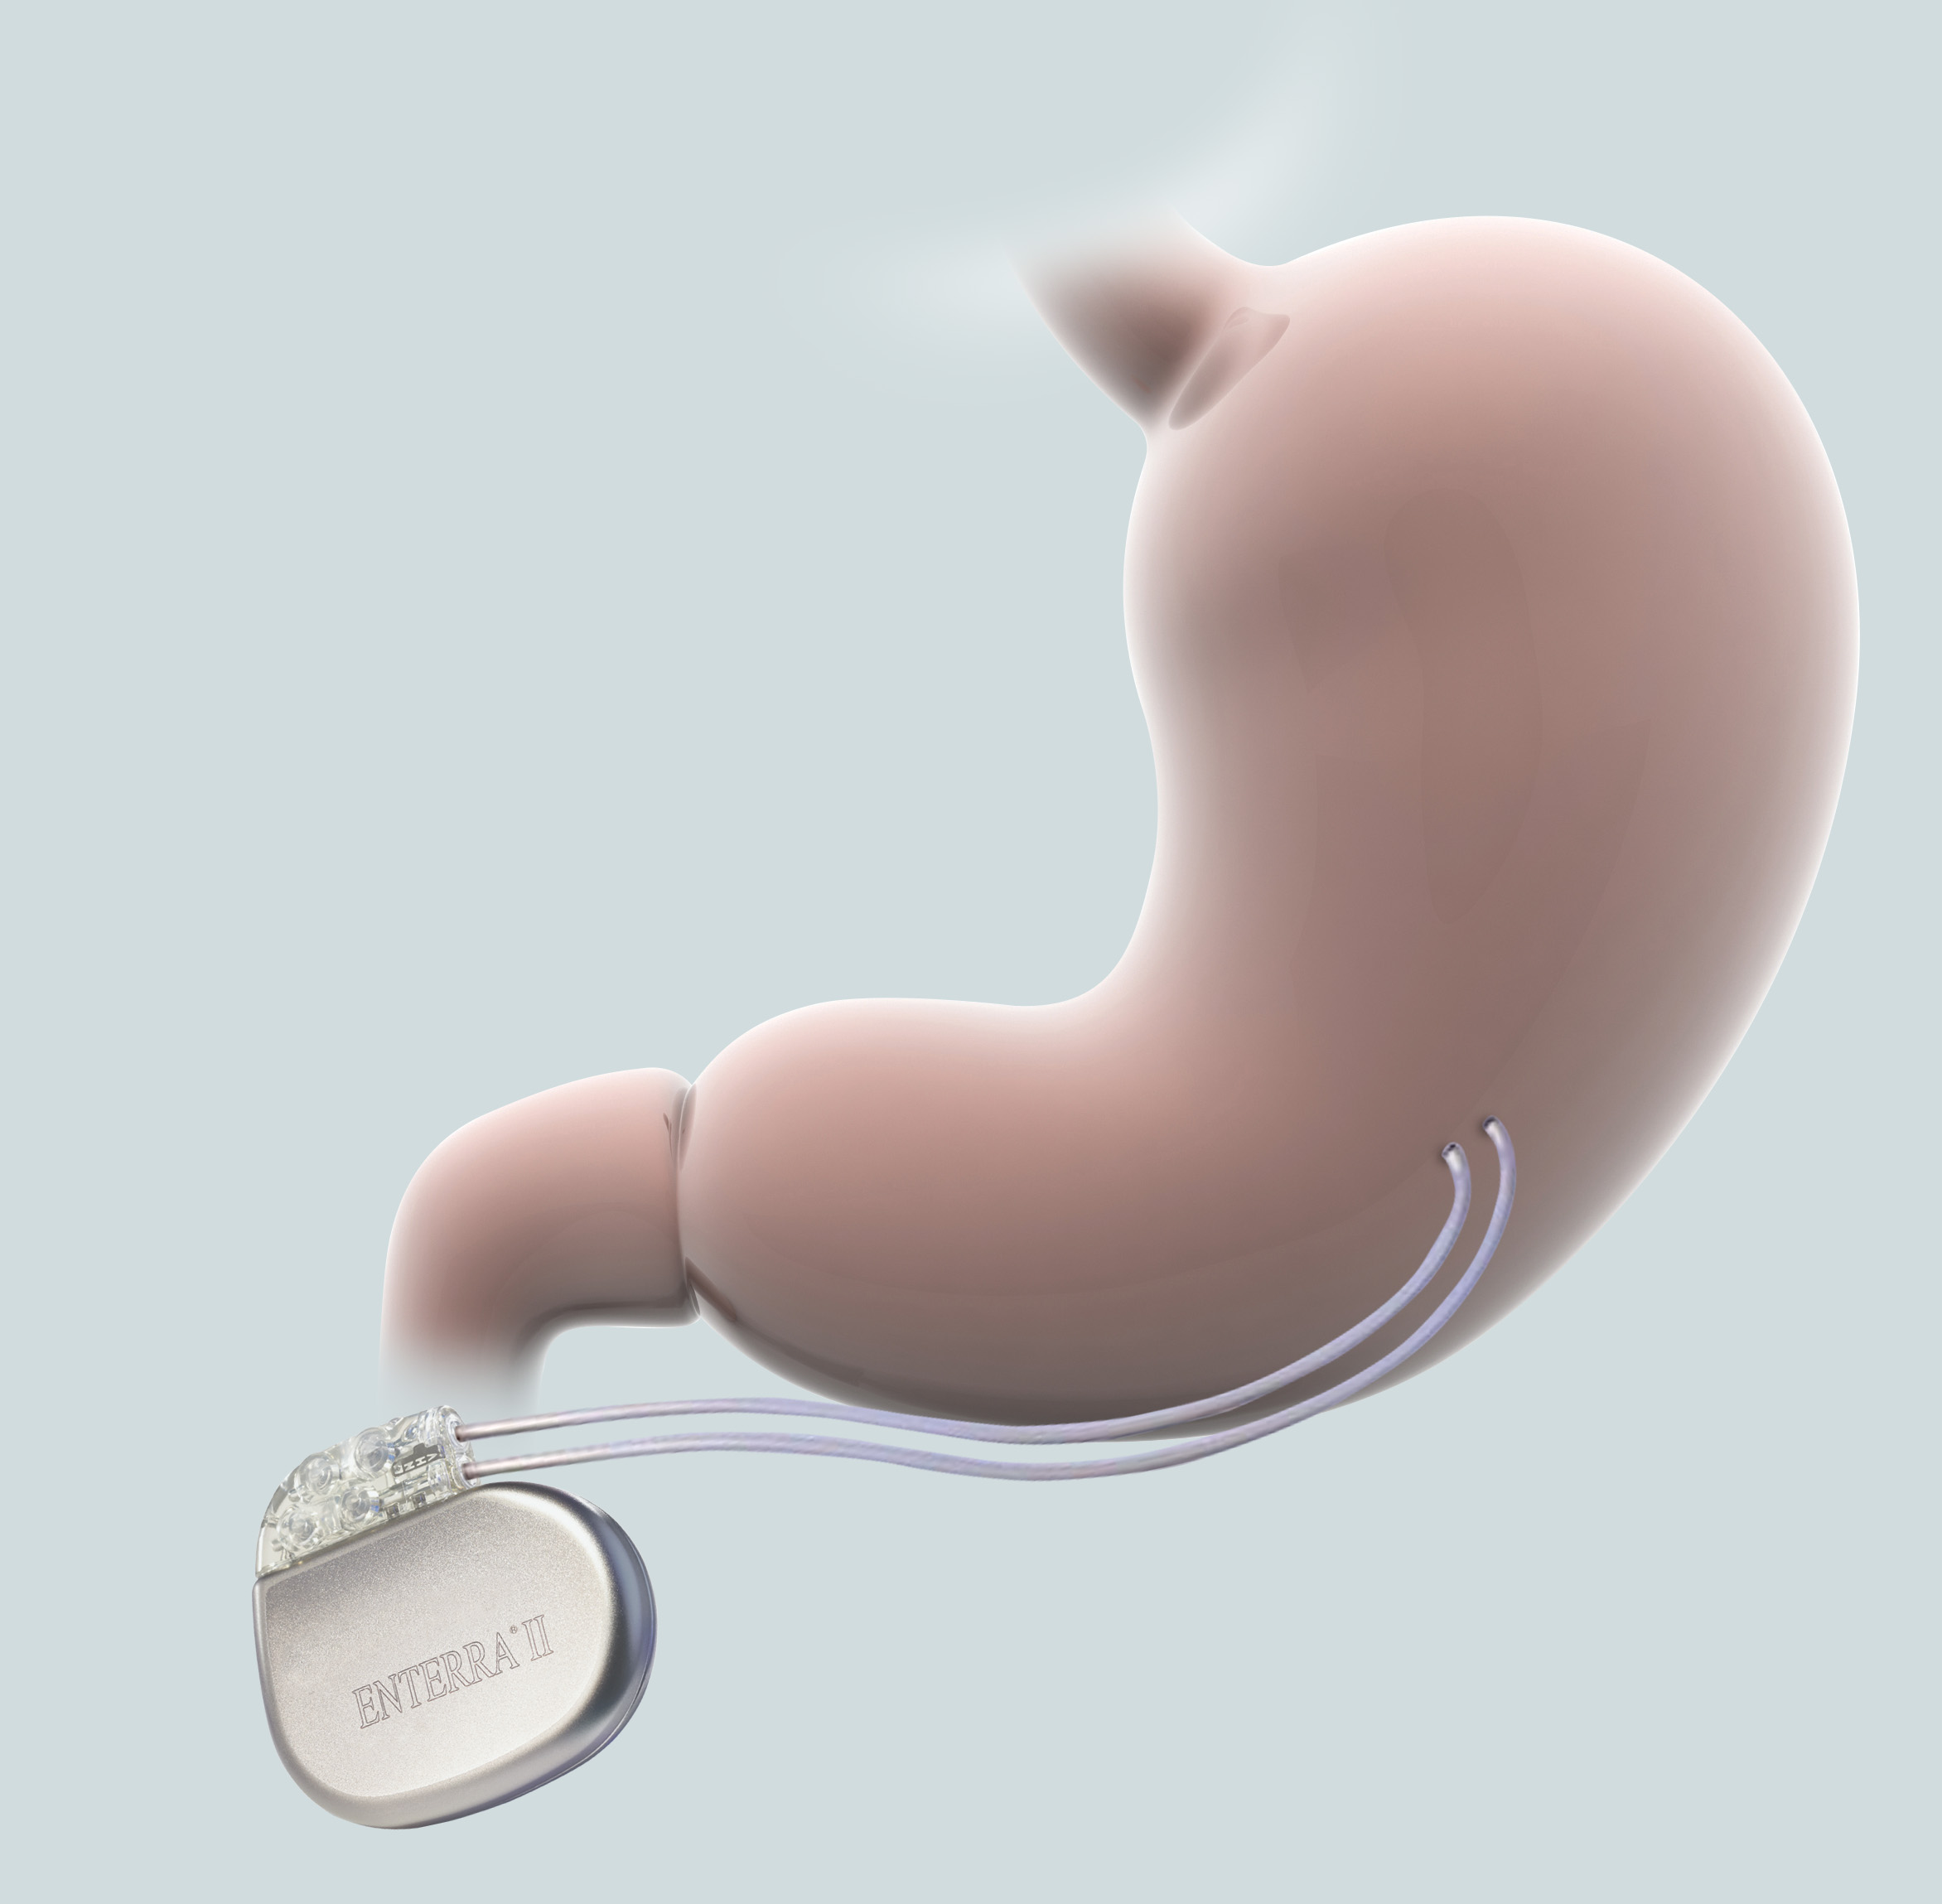 Enterra 2 implanted into stomach with blue background